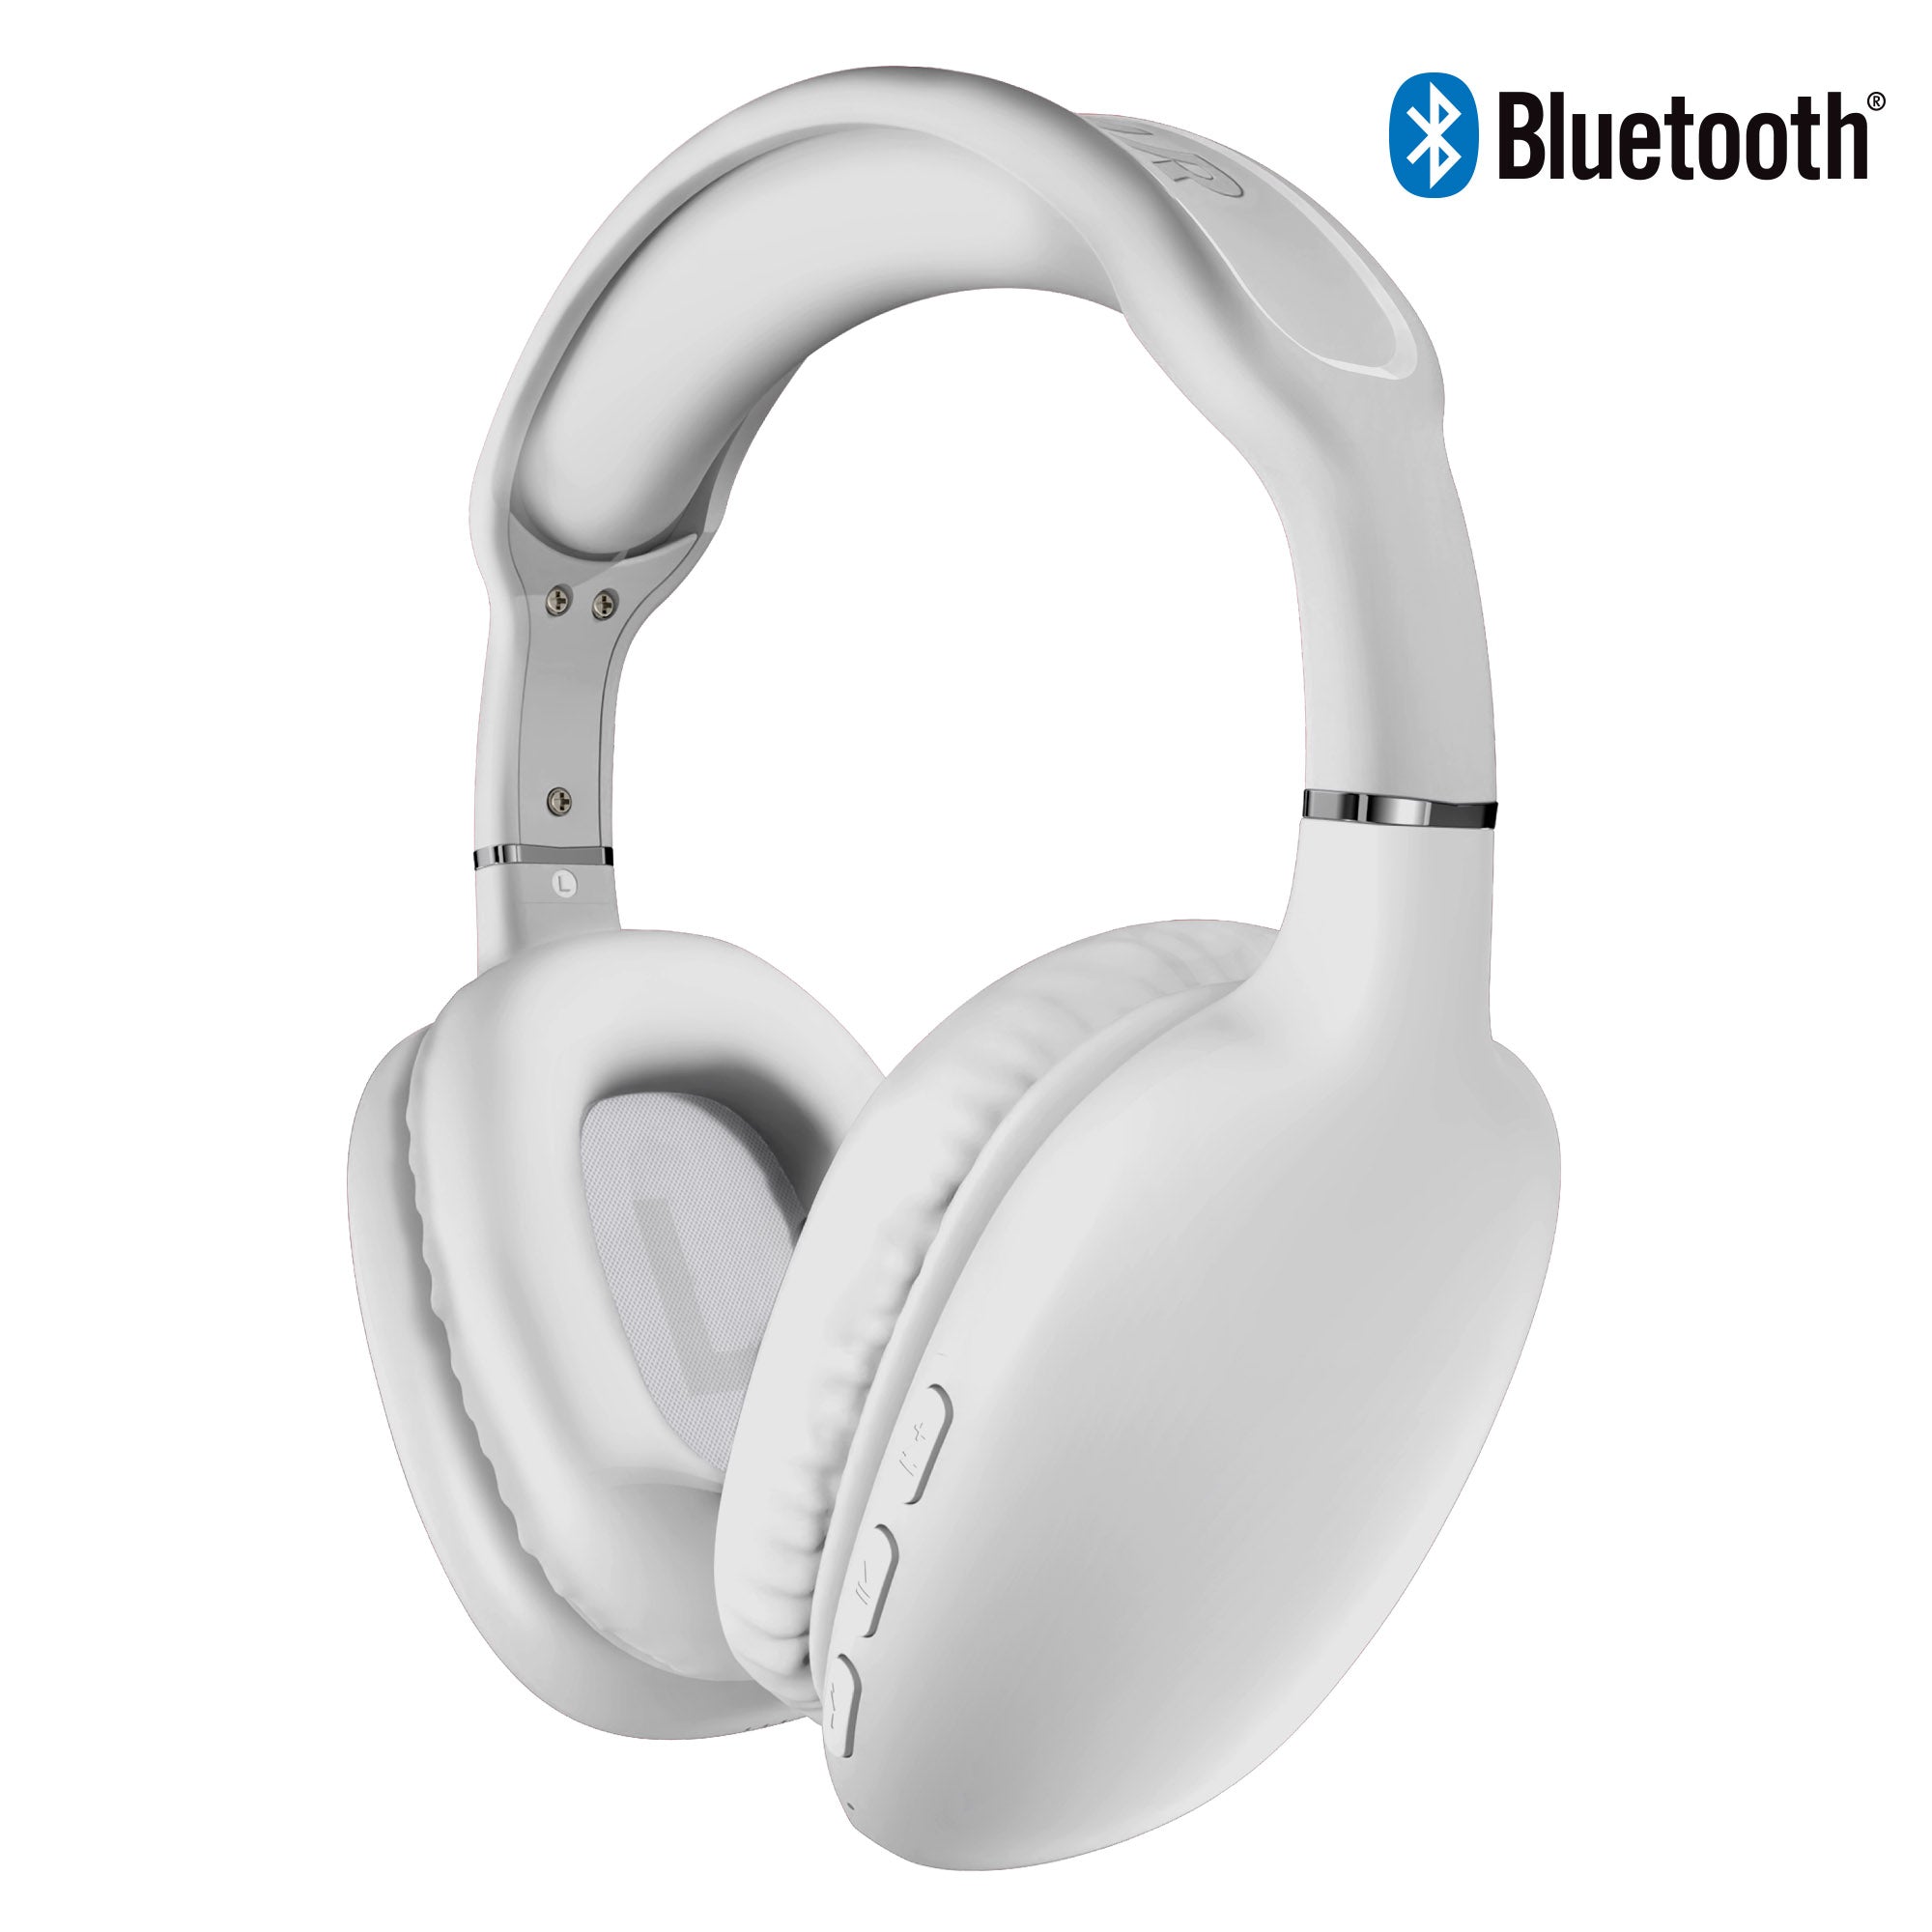 Wireless Headphones, HD Stereo, 10HRS Play WHITE